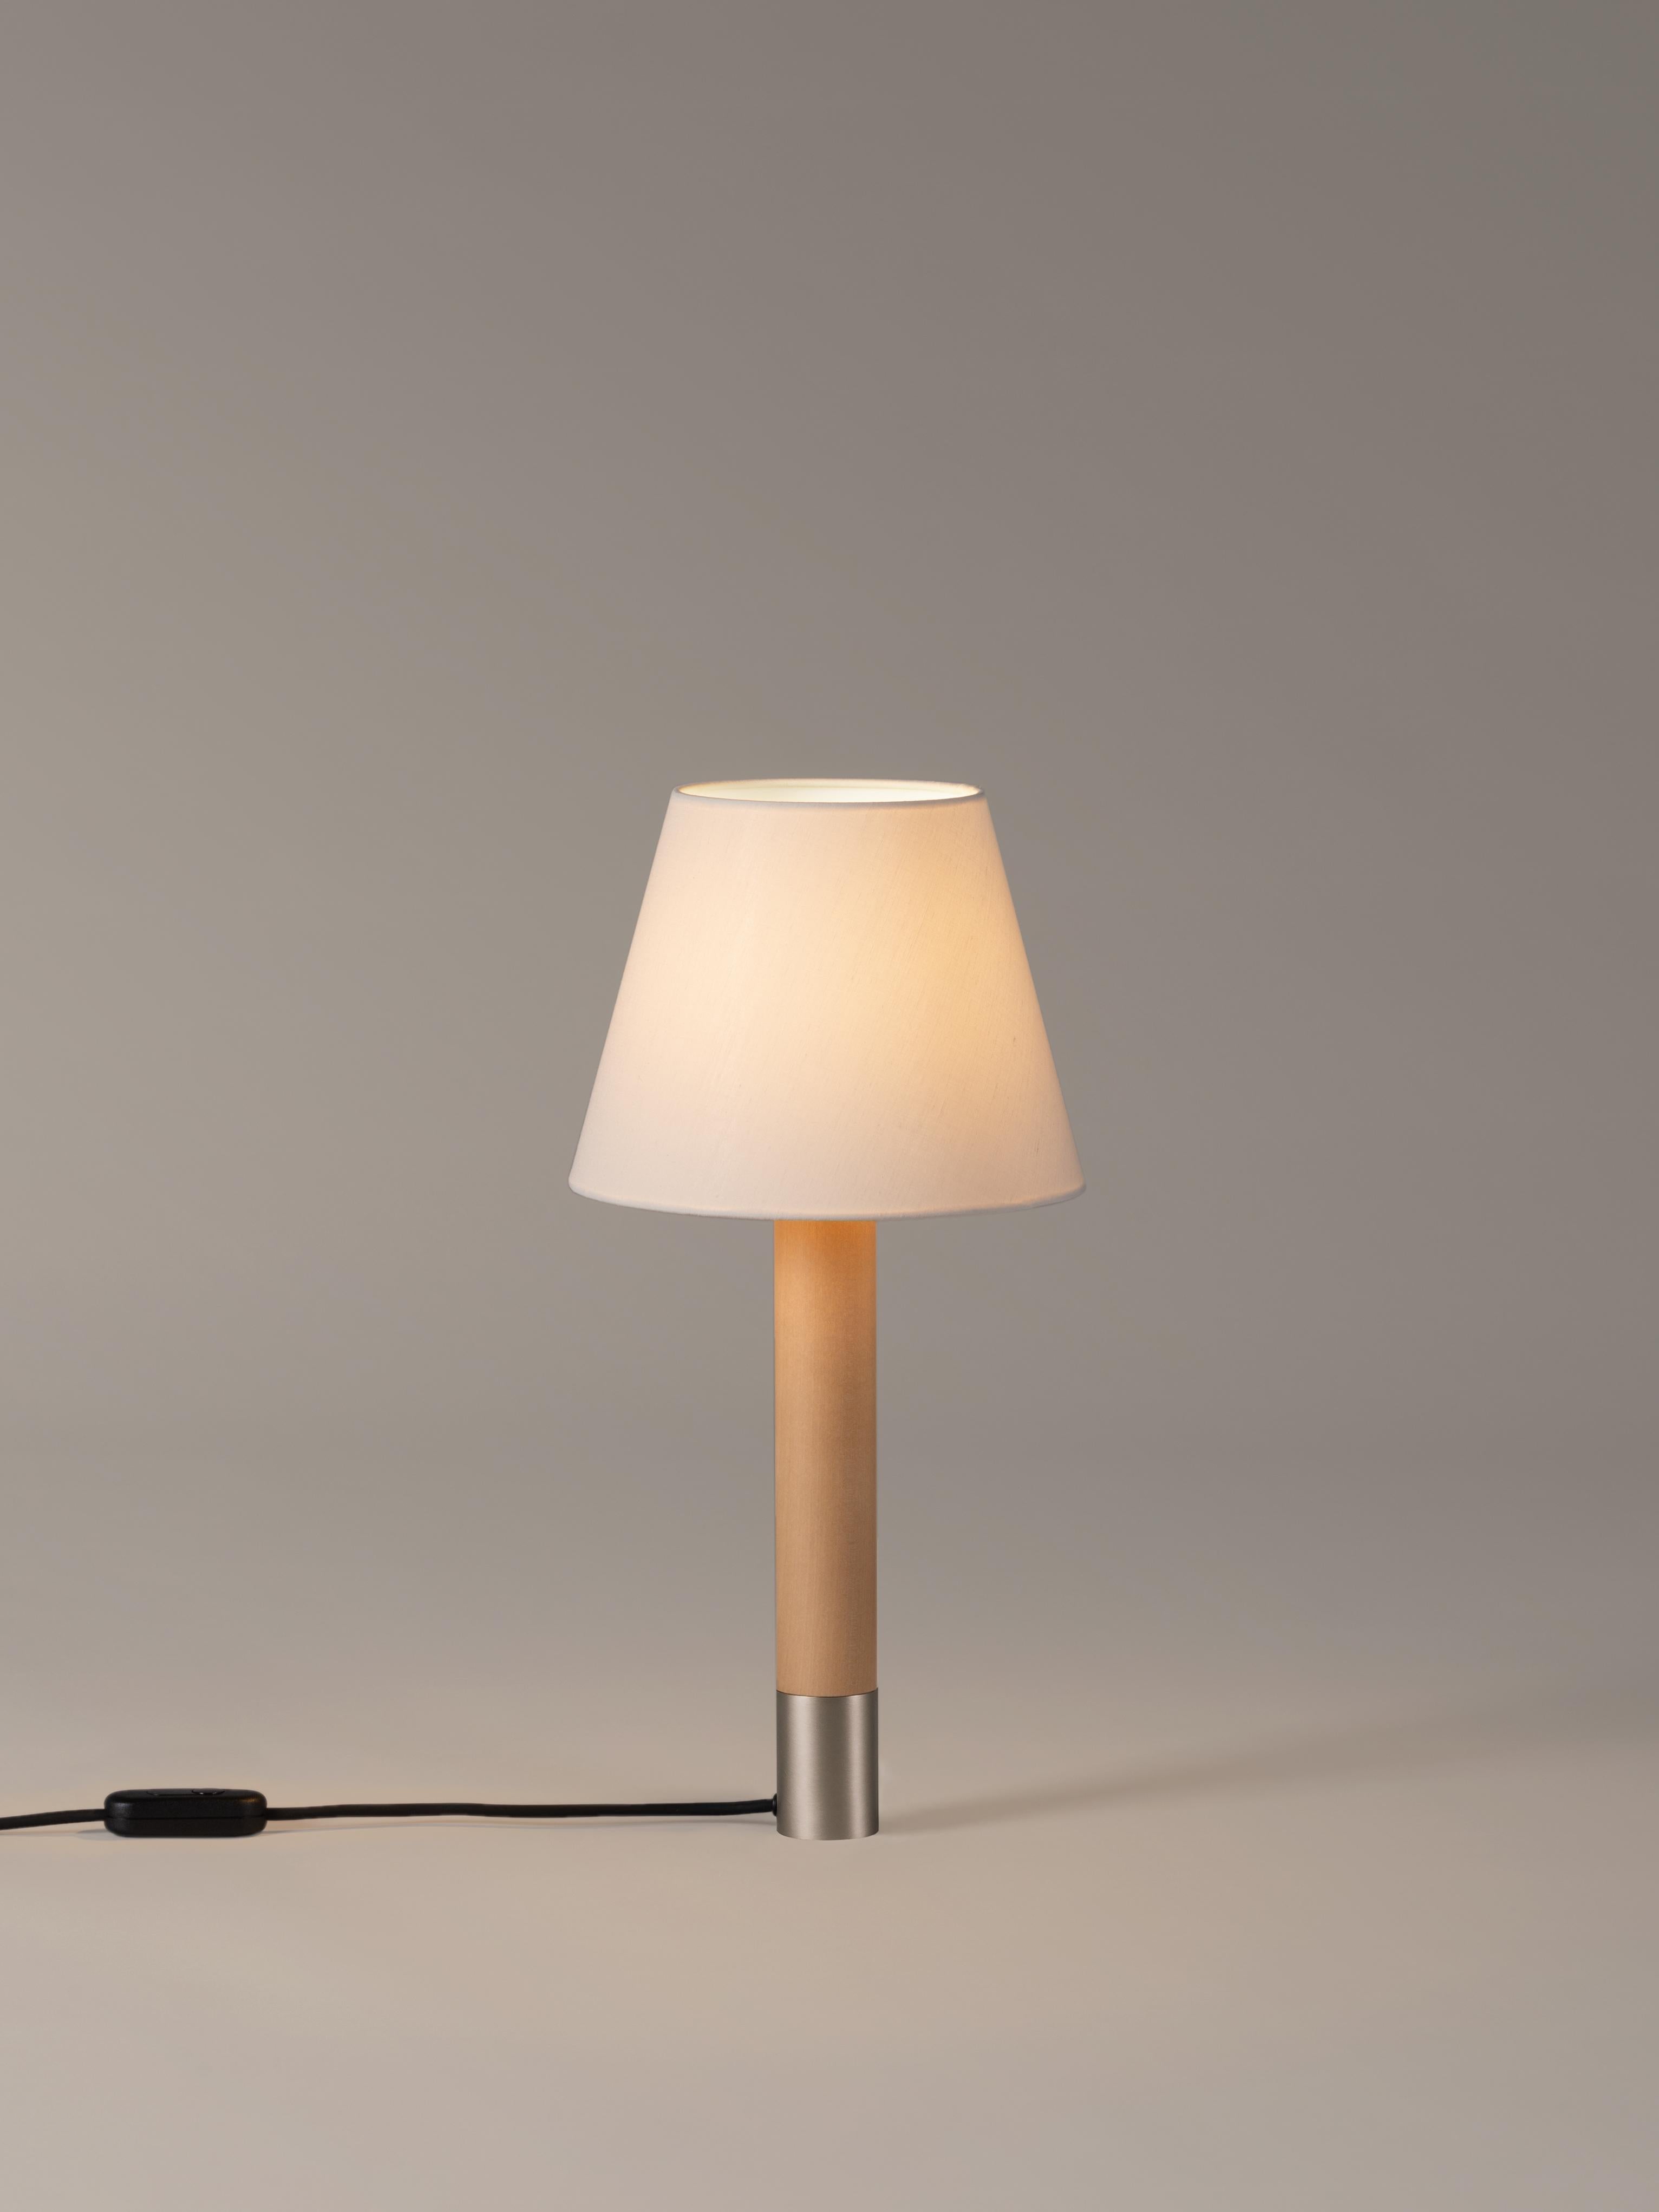 Nickel and White Básica M1 table lamp by Santiago Roqueta, Santa & Cole
Dimensions: D 25 x H 52 cm
Materials: Nickel, birch wood, linen.
Available in other shade colors and with or without the stabilizing disc.
Available in nickel or bronze.

The